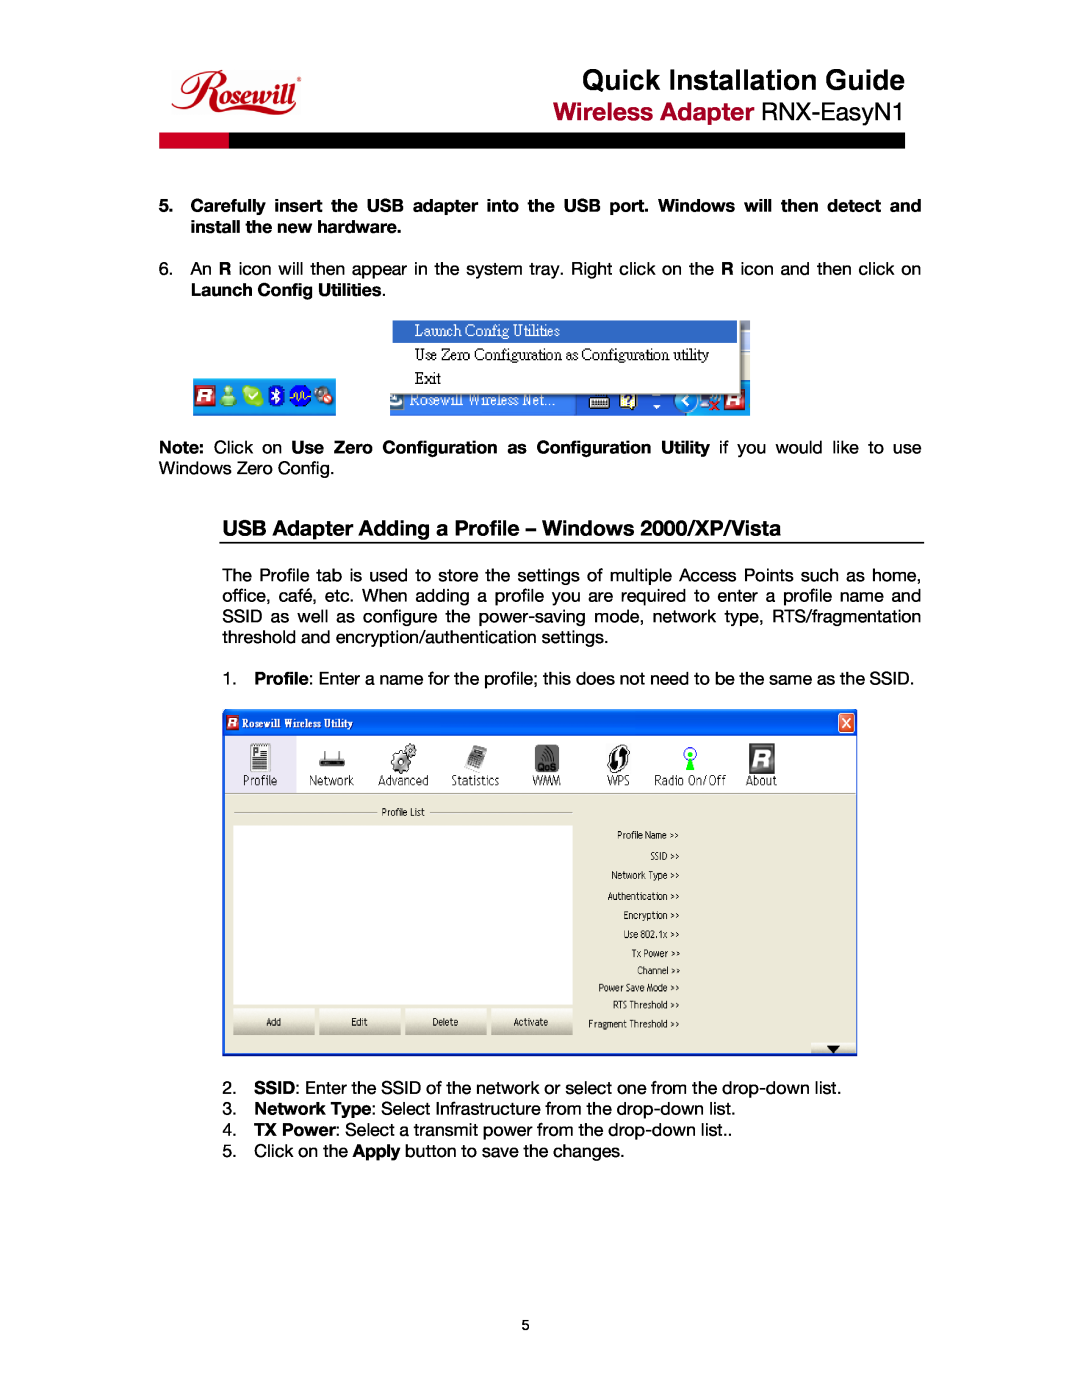 Rosewill RNX-EasyN1 manual USB Adapter Adding a Profile - Windows 2000/XP/Vista, Quick Installation Guide 